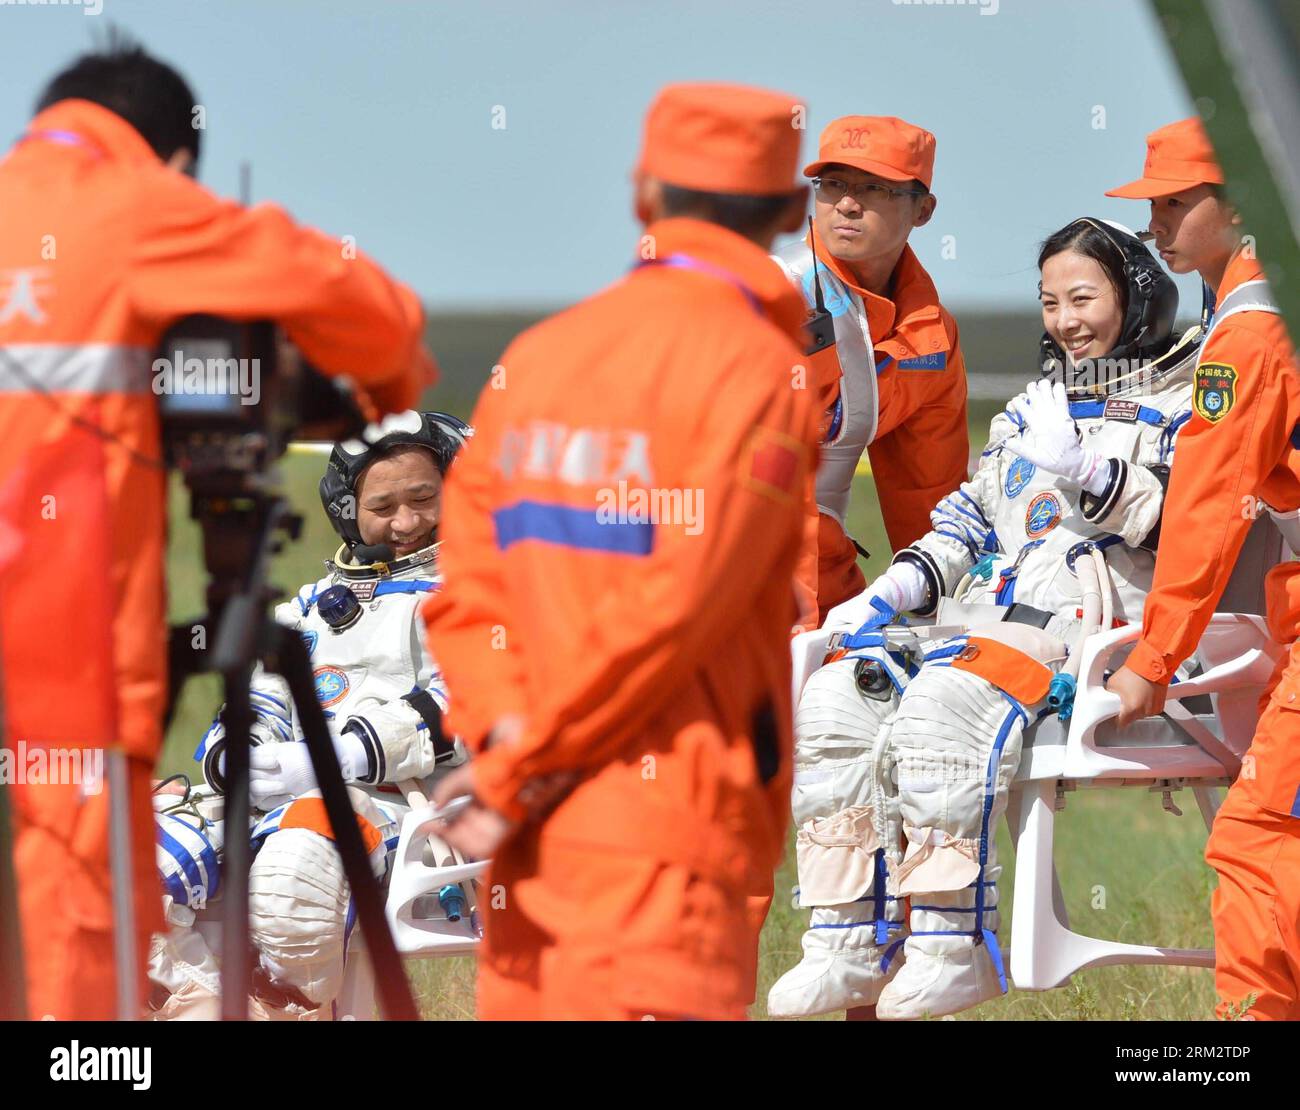 Bildnummer: 59902229  Datum: 26.06.2013  Copyright: imago/Xinhua (130626) -- SIZIWANG BANNER, June 26, 2013 (Xinhua) --Female astronaut Wang Yaping (R) waves after getting out of the re-entry capsule of China s Shenzhou-10 spacecraft following its landing in north China s Inner Mongolia Autonomous Region on June 26, 2013. Commander-in-chief of China s manned space program Zhang Youxia has announced that the Shenzhou-10 mission was successful after the three crewmembers landed safely and left the spacecraft s re-entry module Wednesday morning. (Xinhua/Ren Junchuan) (ry) CHINA-SCIENCE-SHENZHOU-1 Stock Photo